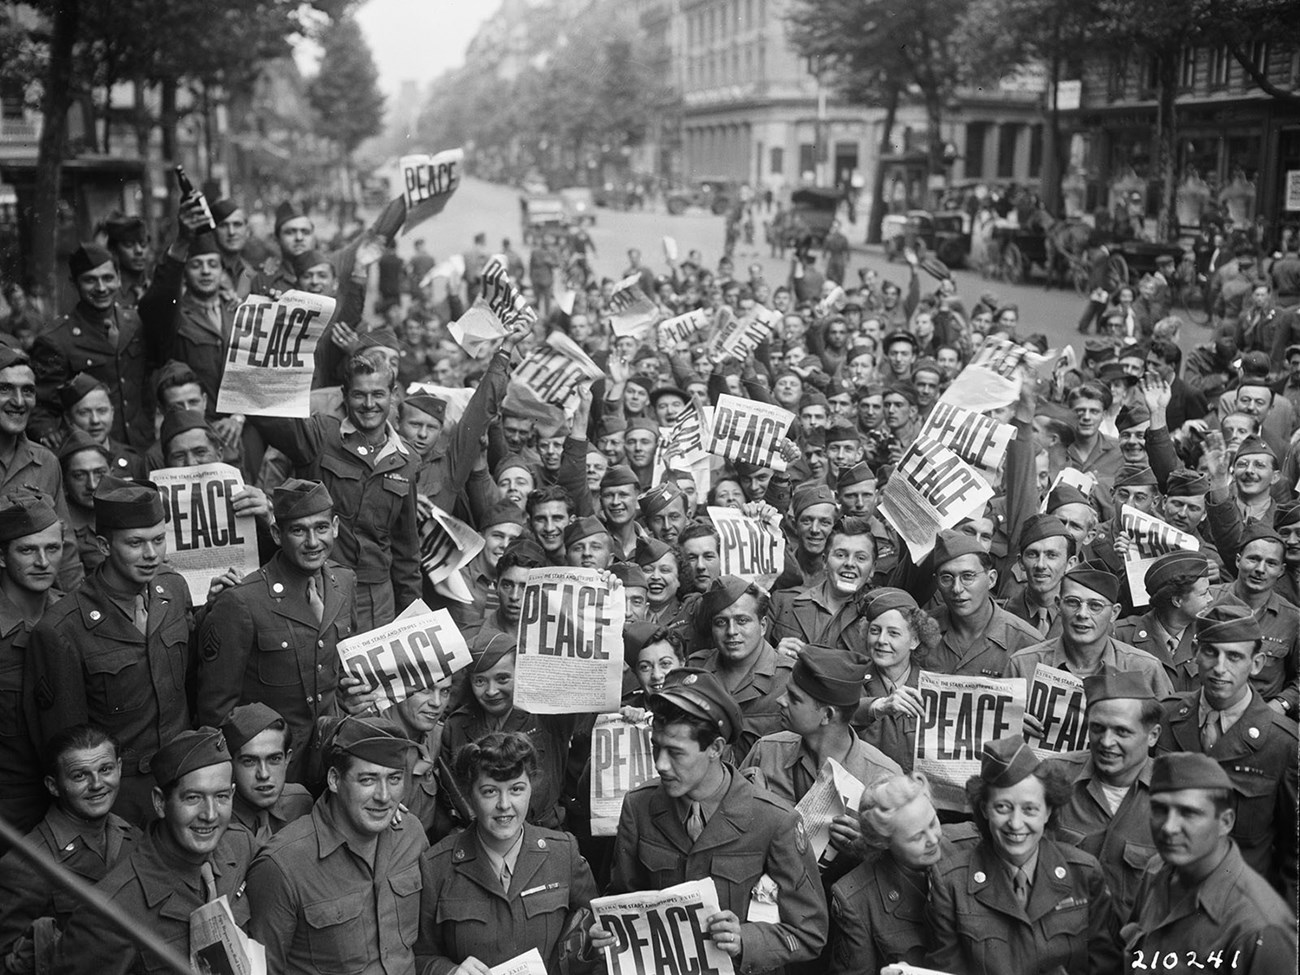 Many soldiers in uniform crowd a street holding newspapers that announce "Peace."